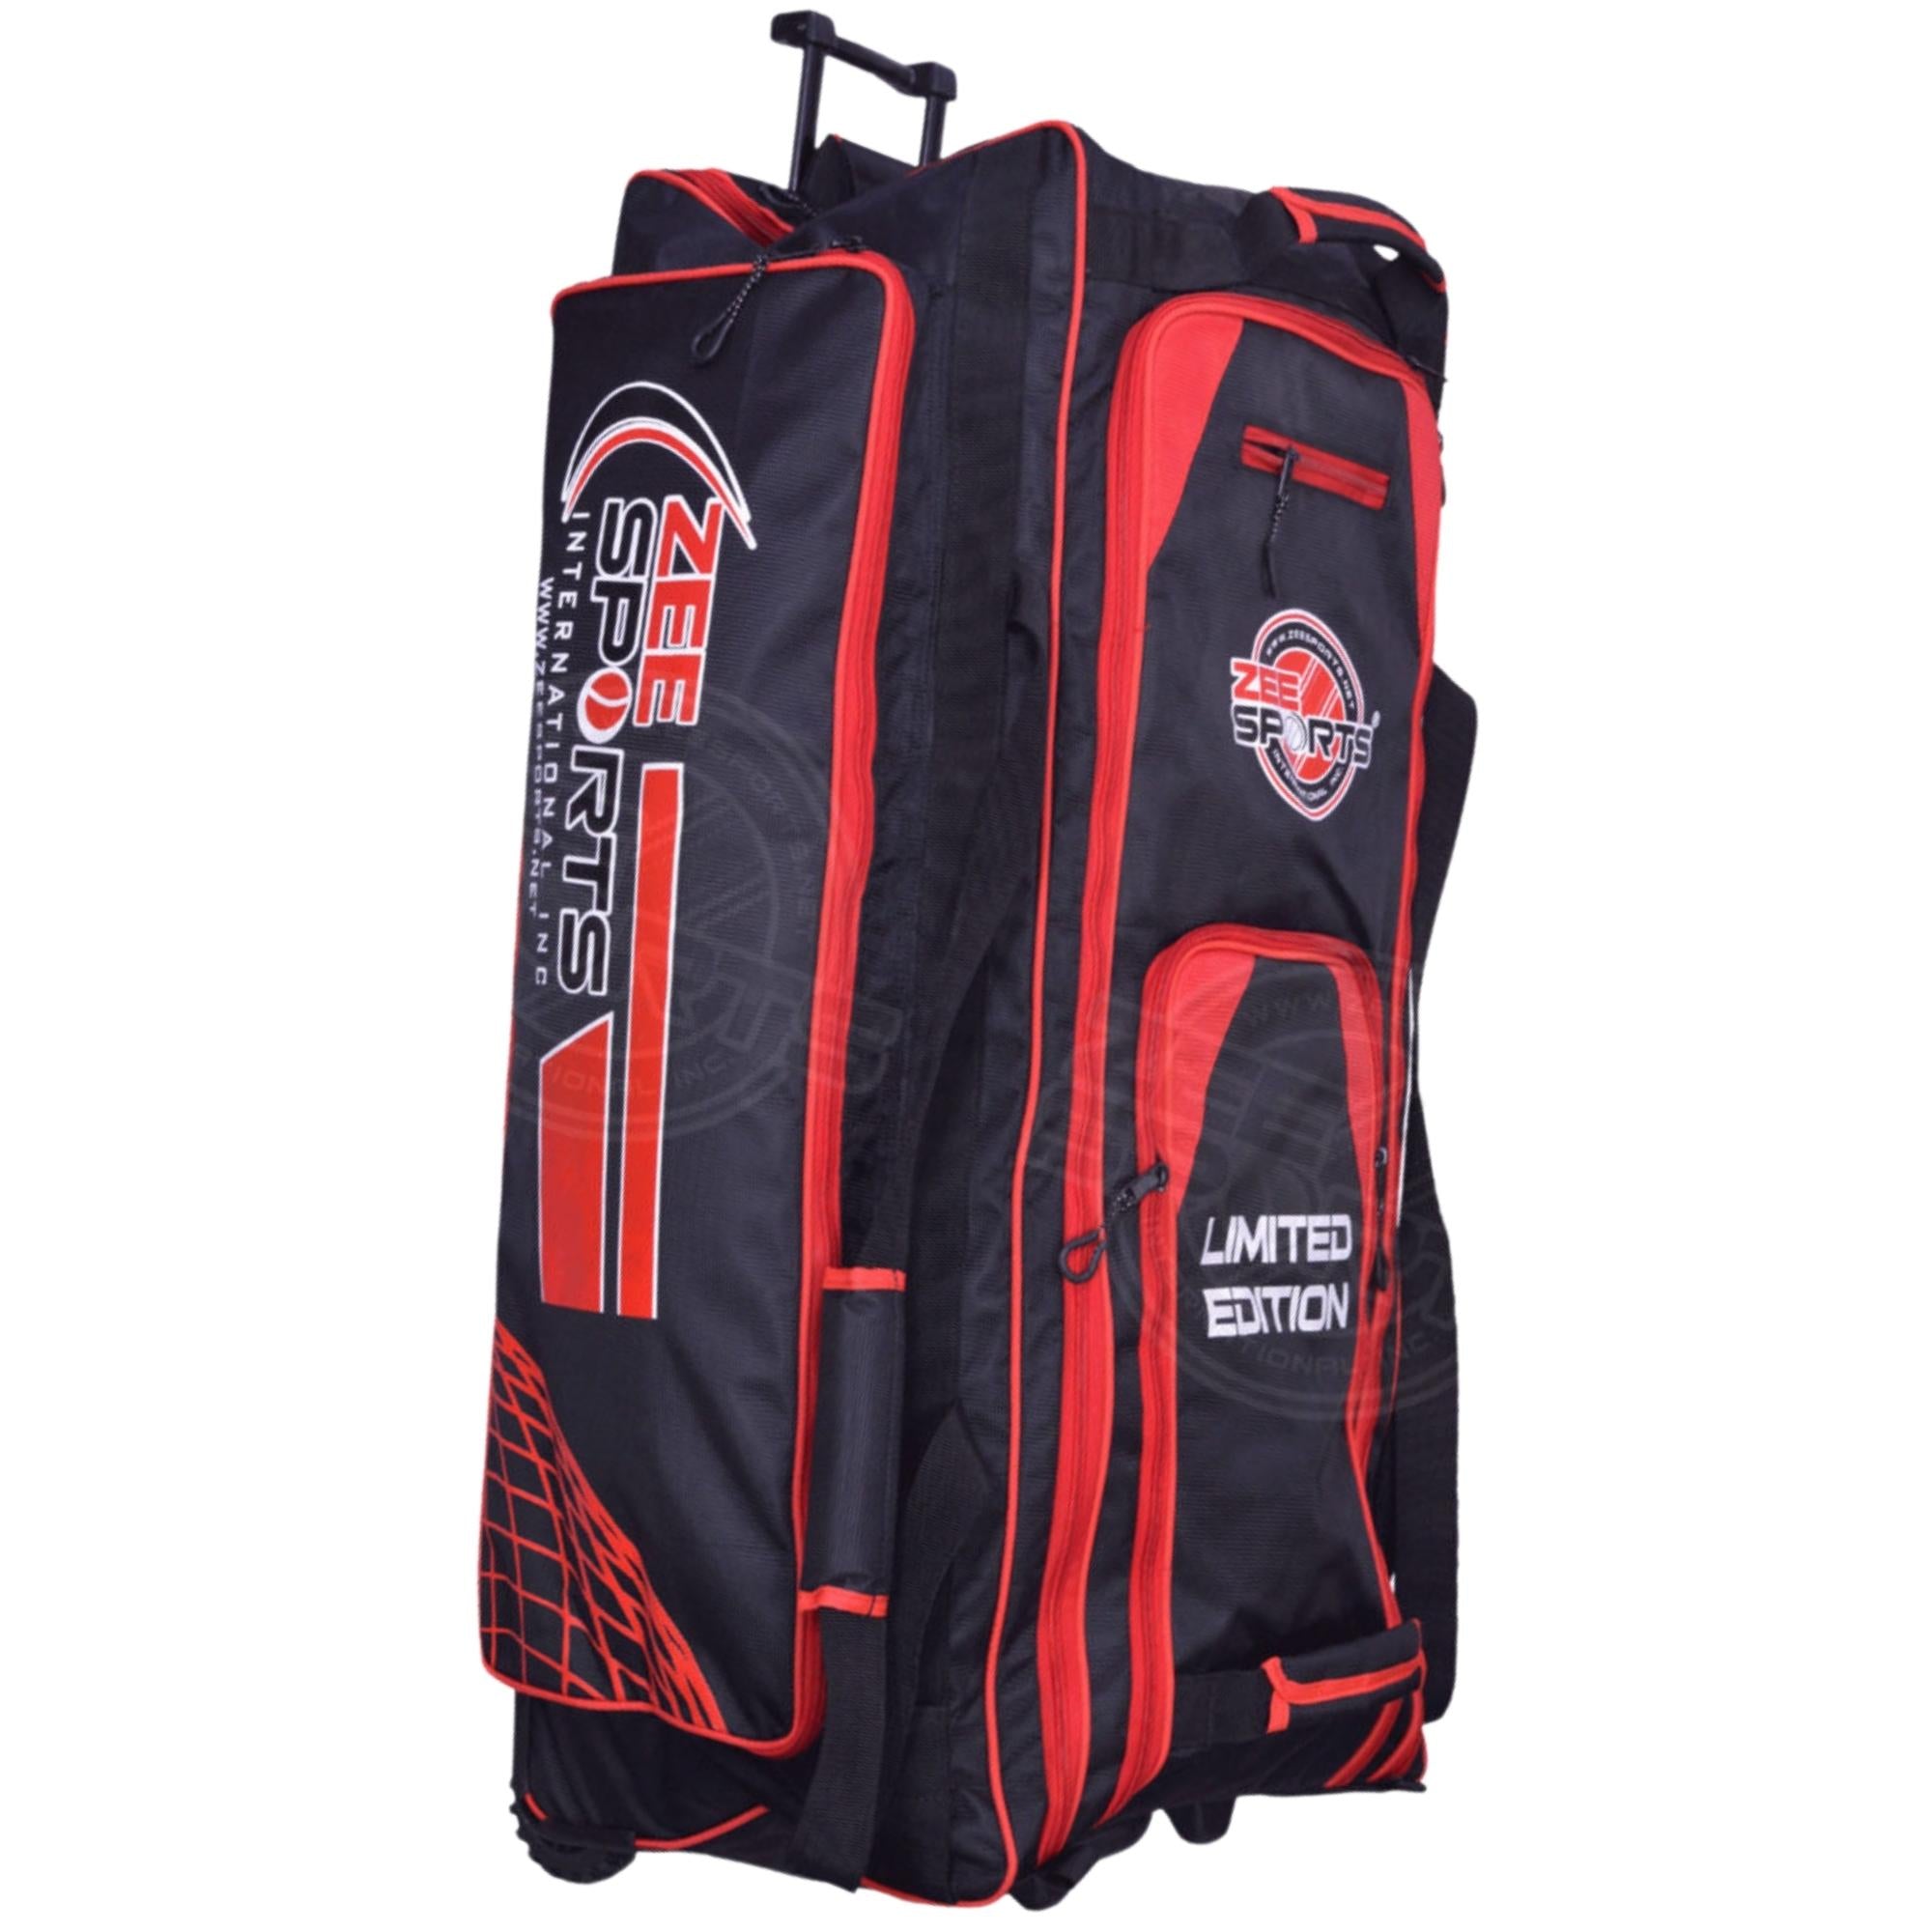 Zee Sports Limited Edition Kit Bag with Ice Box FREE SHIPPING